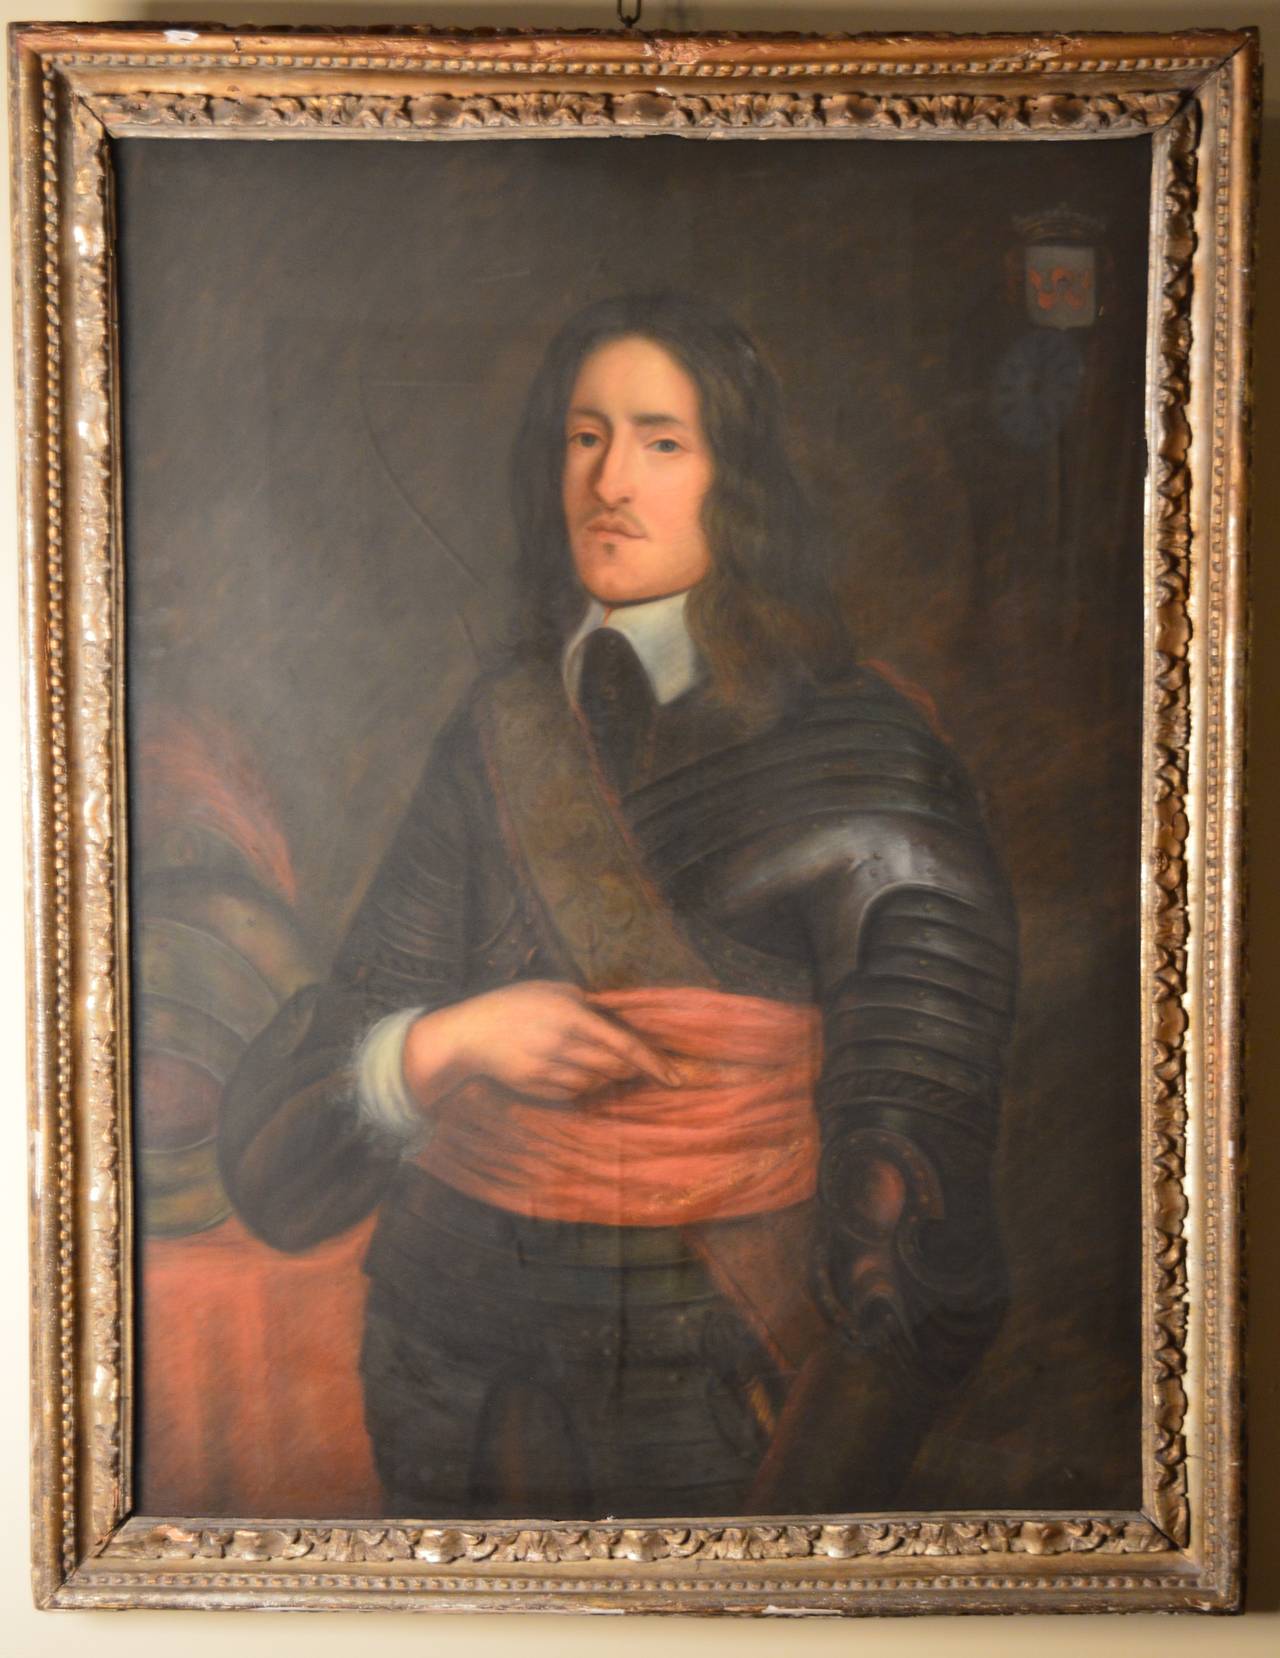 A portrait of a Nobleman drawn in chalk pastel on paper, circa 1790-1800, with armorial shield on the top right.
Framed under glass in the original 18th century Louis XVI carved wood frame.

Please note that the glass has many reflections that